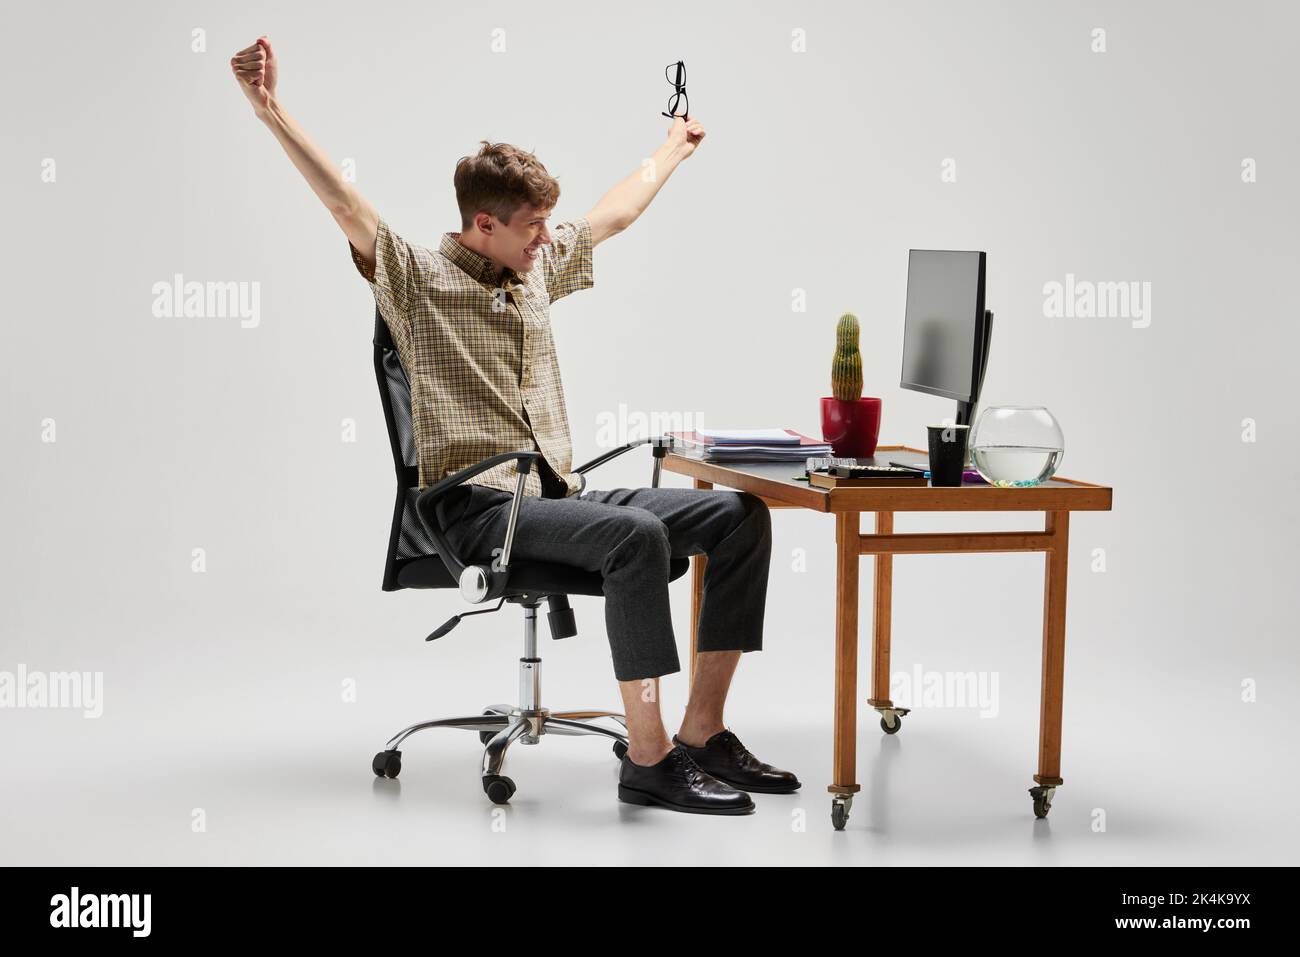 Happy and cheerful student sitting at computer desk and studying. Business, career, home education, youth, remote workplace concept Stock Photo